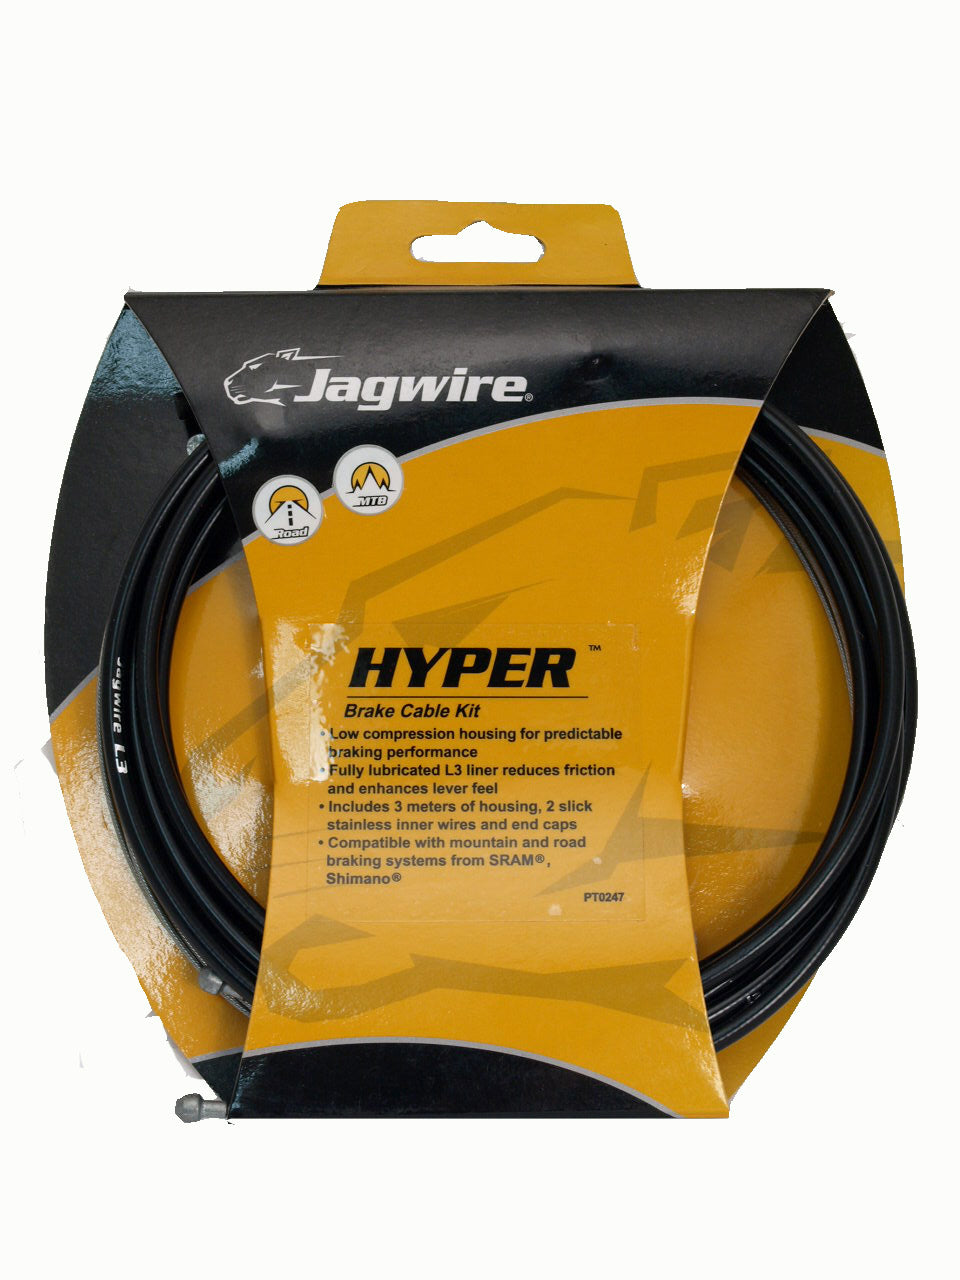 Jagwire Hyper Universal Sport Brake Cable Kit Complete Housing Road or Mountain